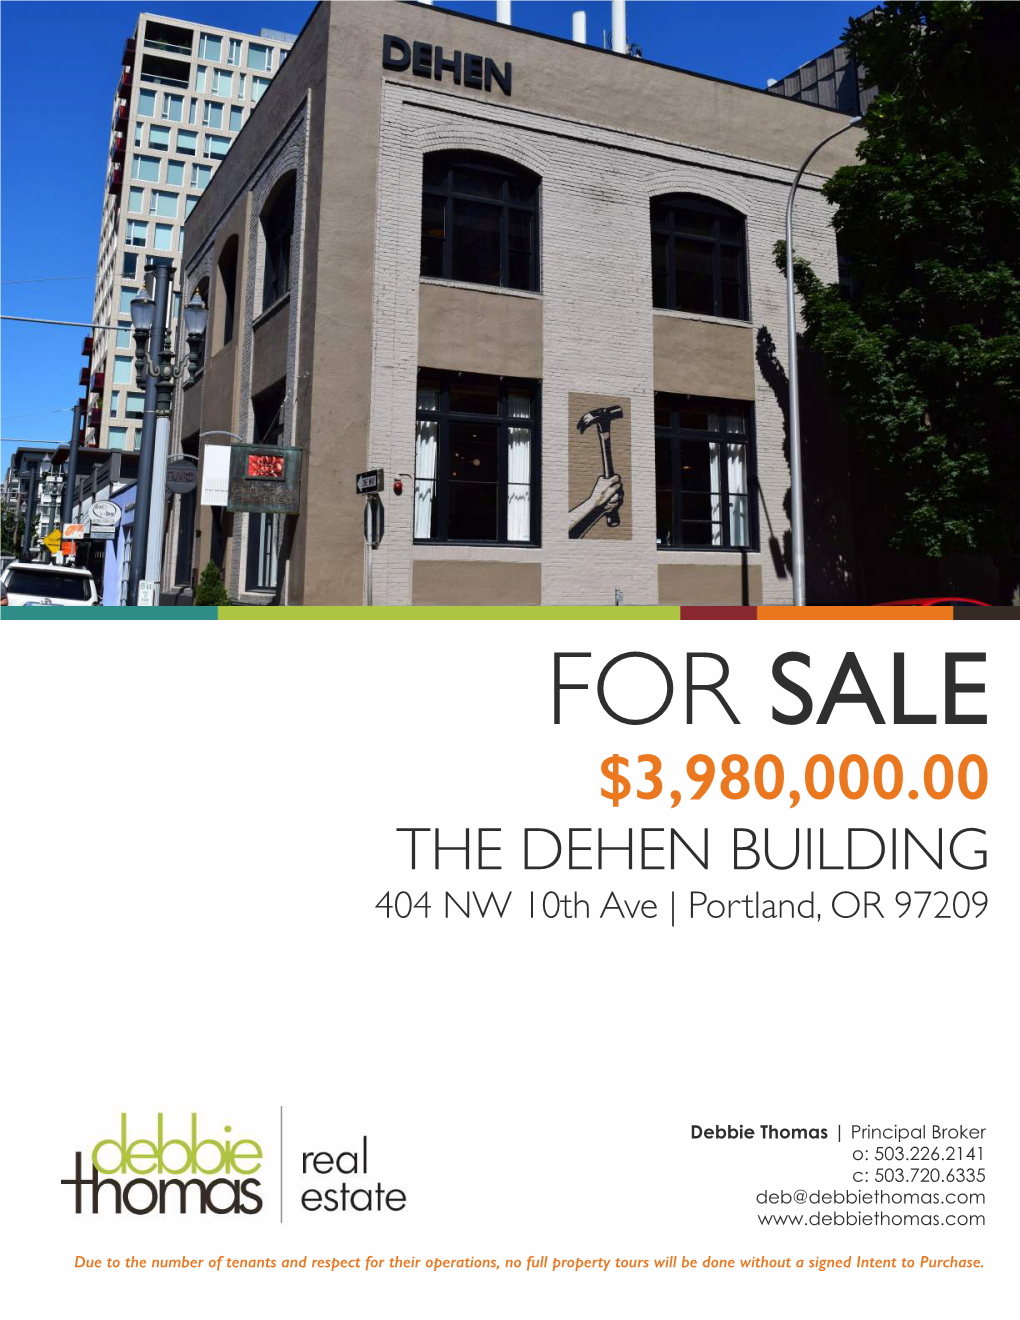 FOR SALE $3,980,000.00 the DEHEN BUILDING 404 NW 10Th Ave | Portland, OR 97209